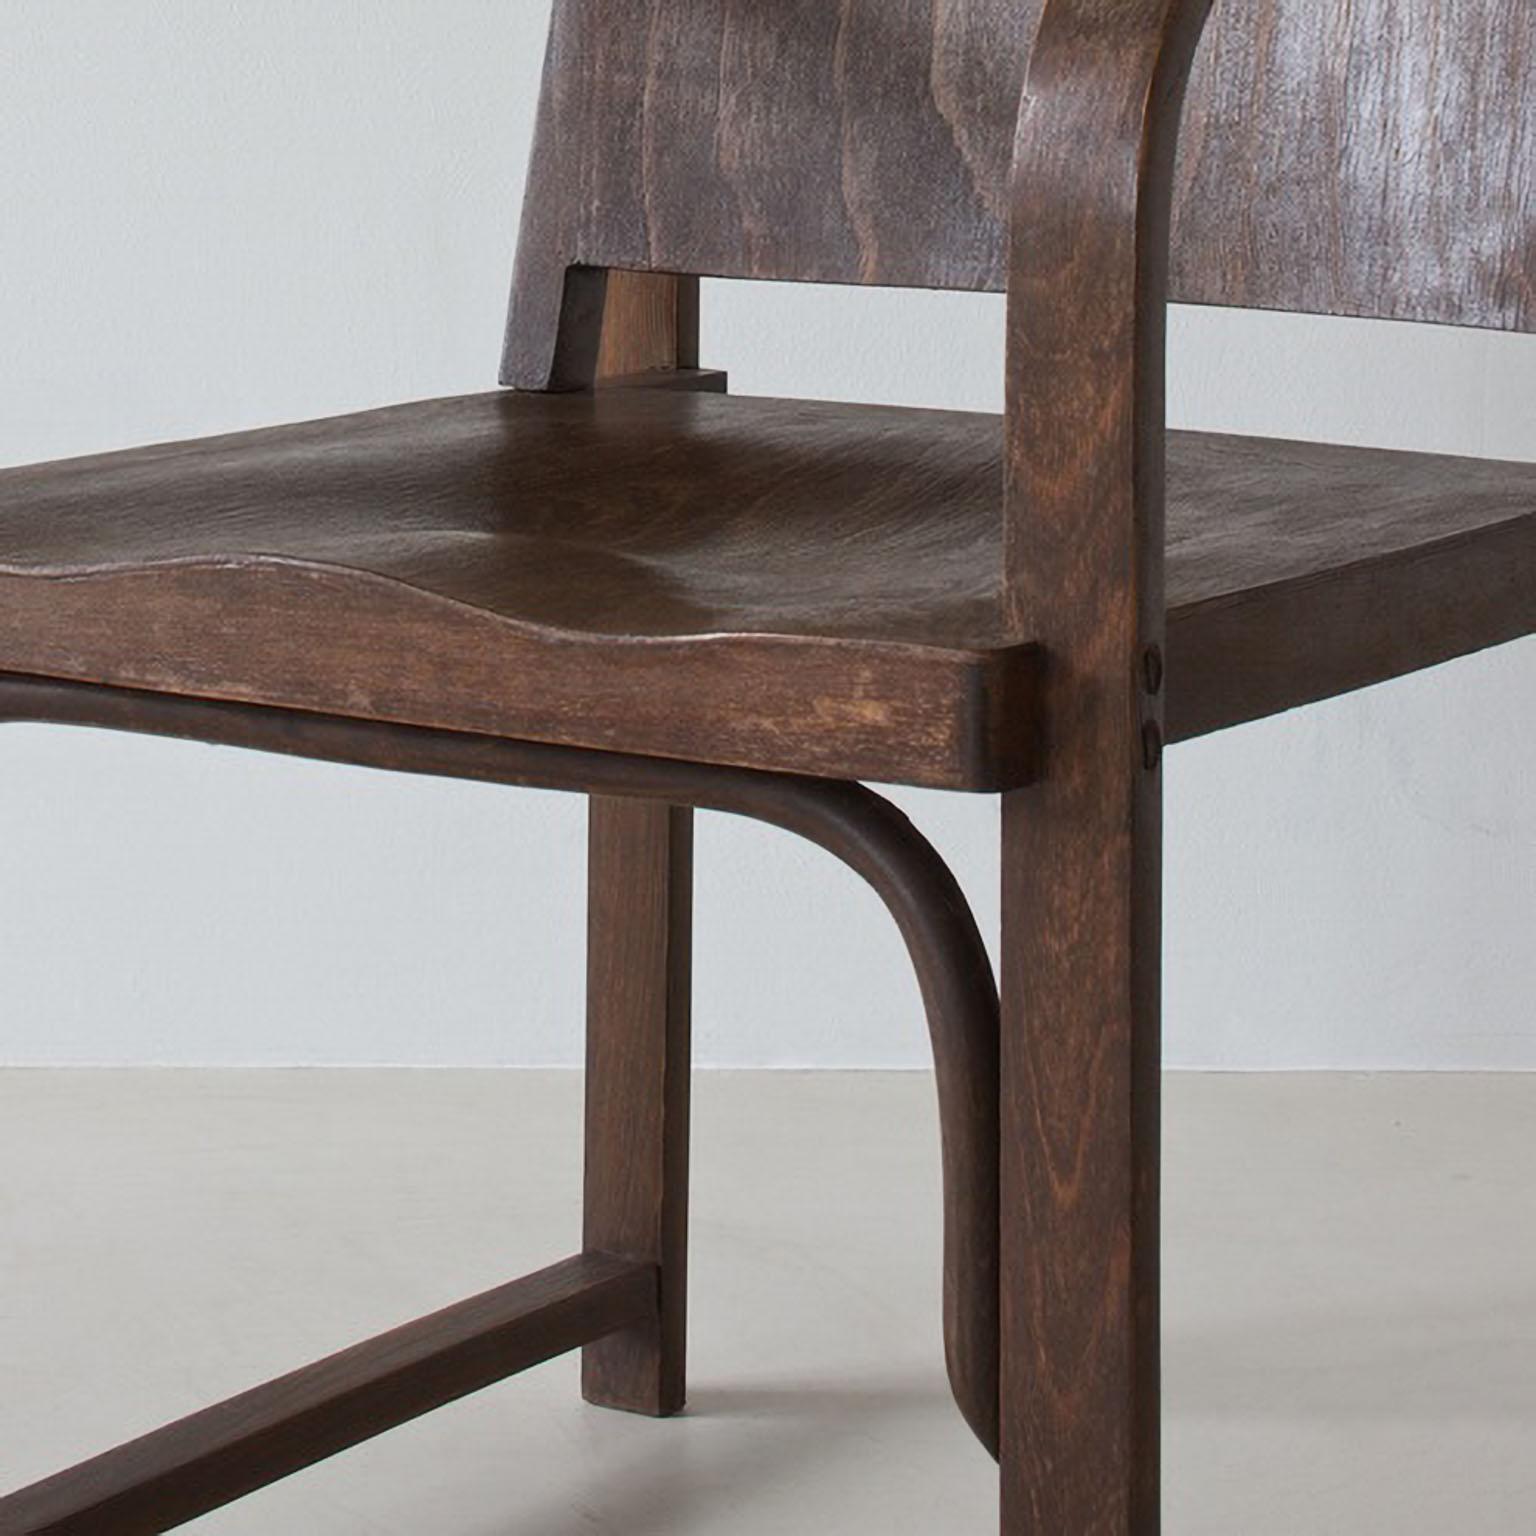 Mid-20th Century Modernist Thonet A 745/F Armchair manufactured by Tatra, Stained Wood, c. 1930 For Sale